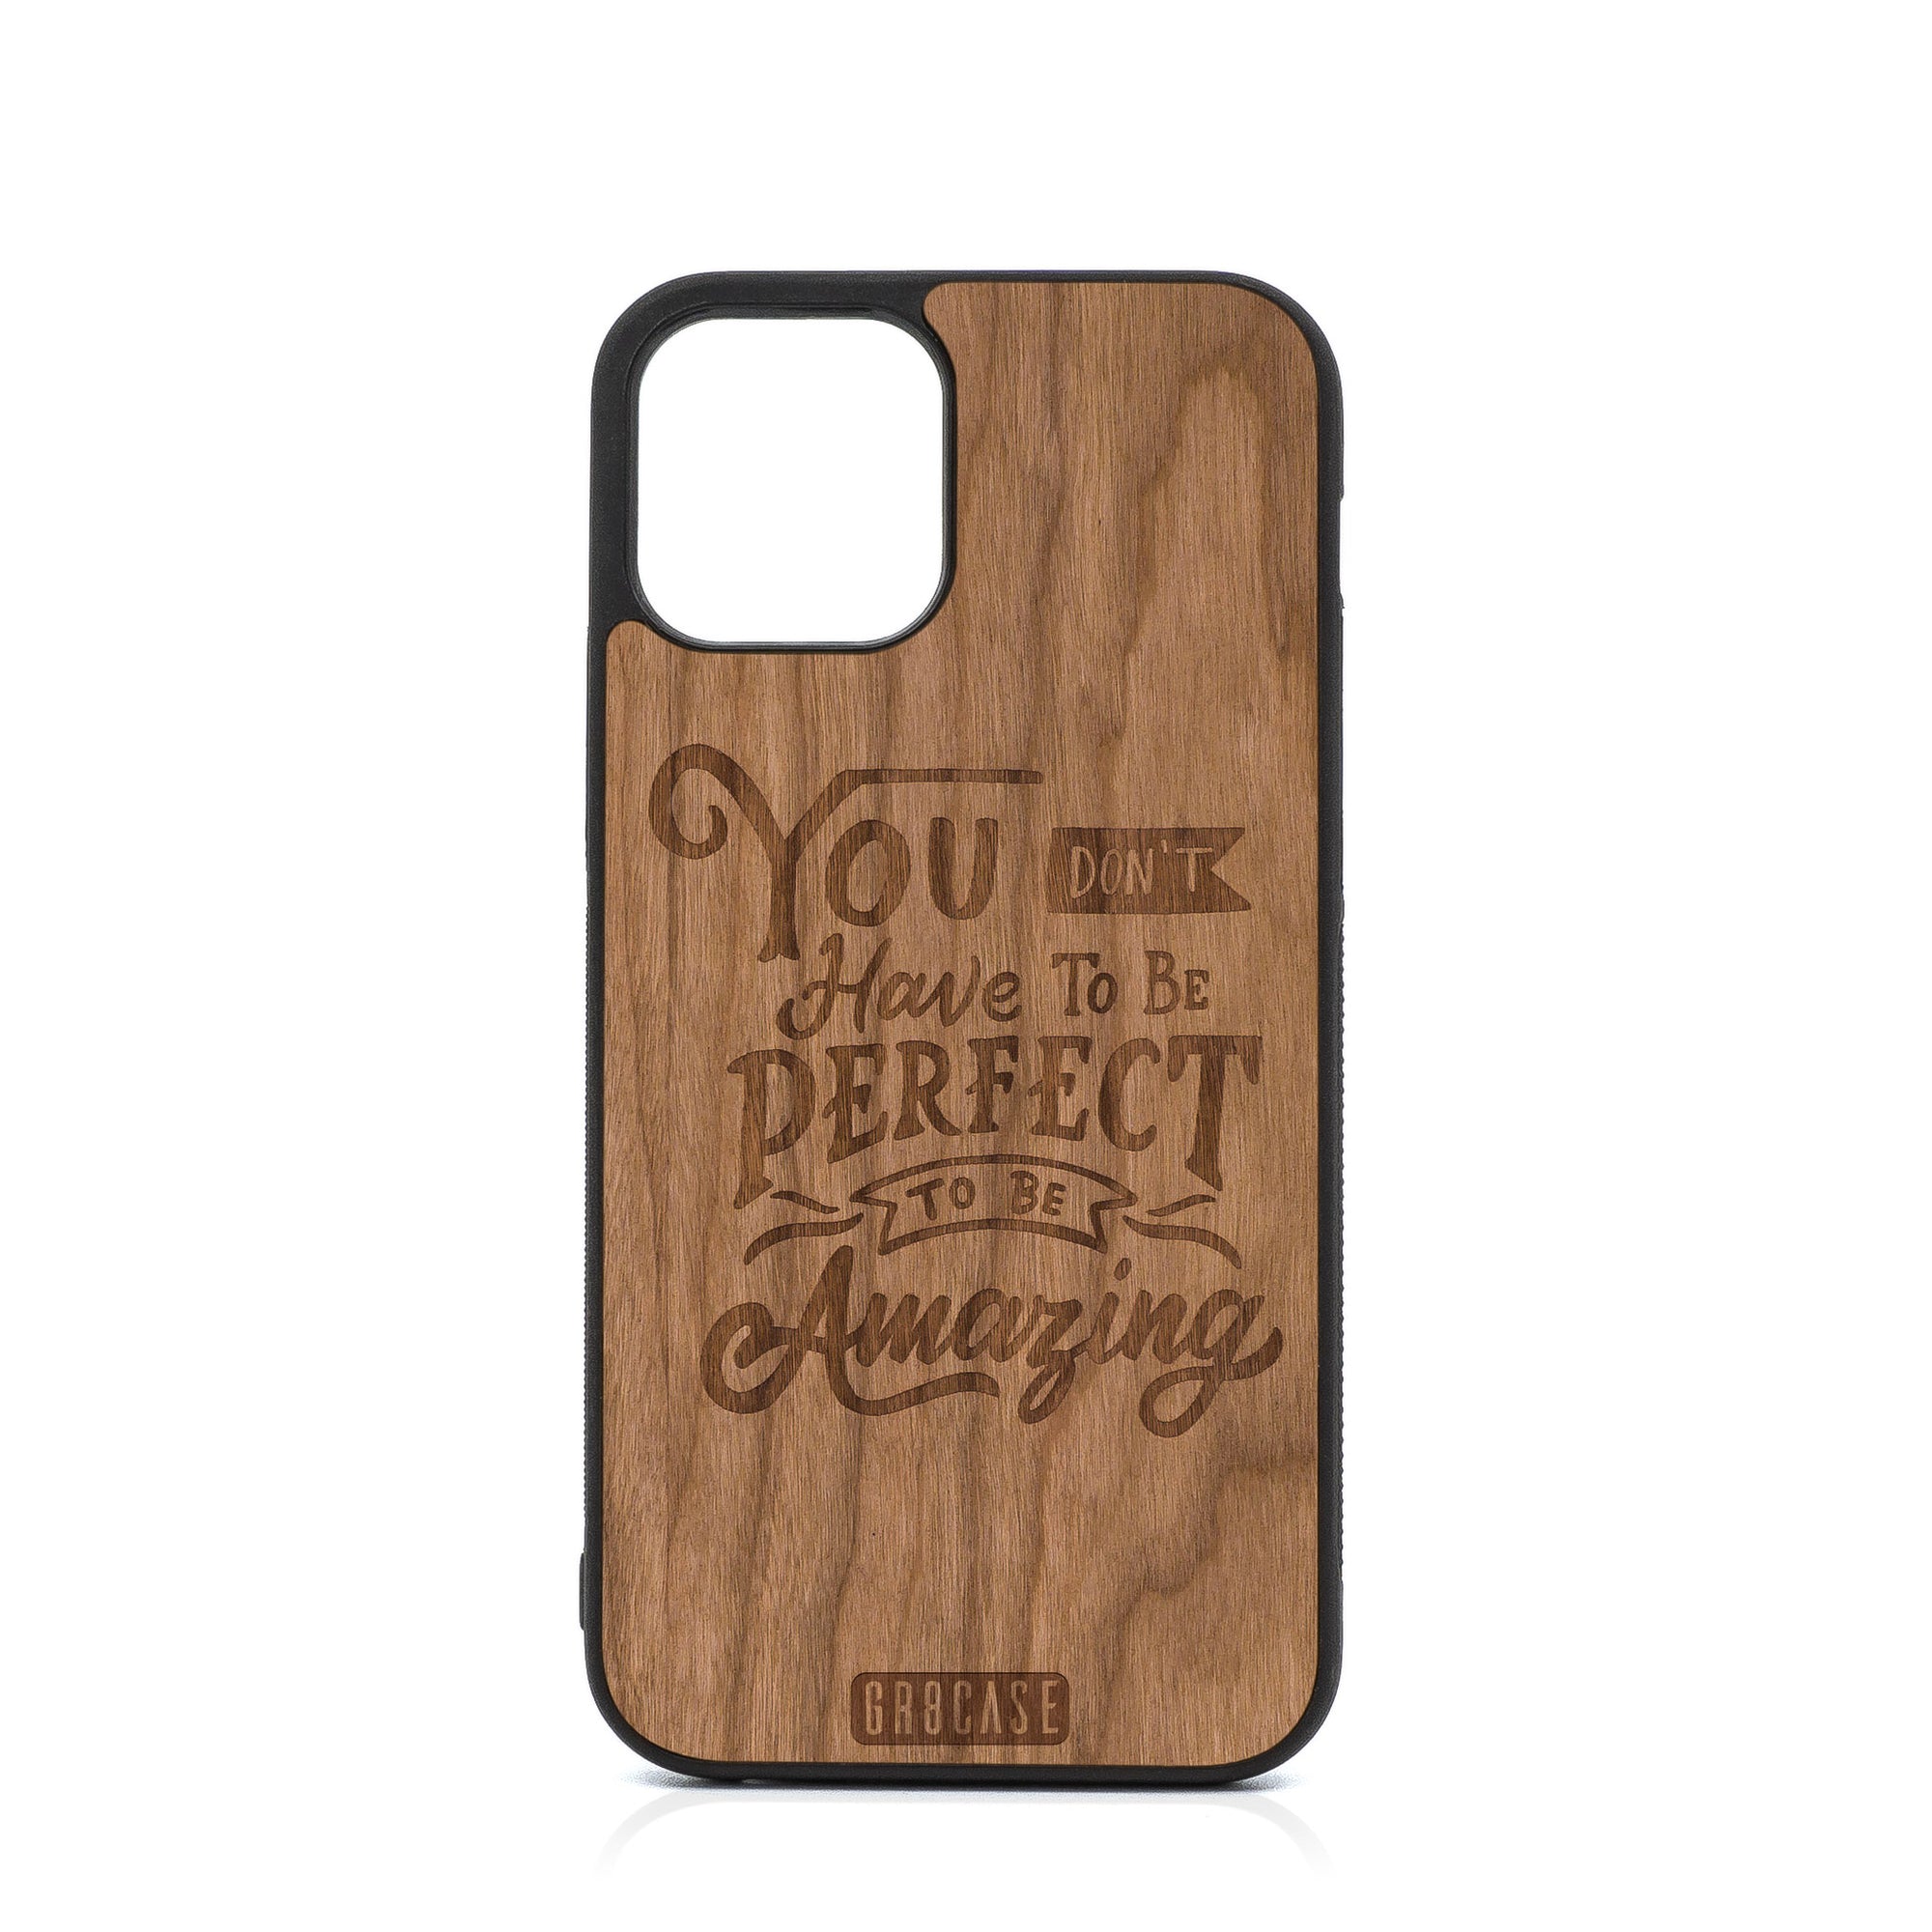 You Don’t Have To Be Perfect To Be Amazing Design Wood Case For iPhone 12 Pro